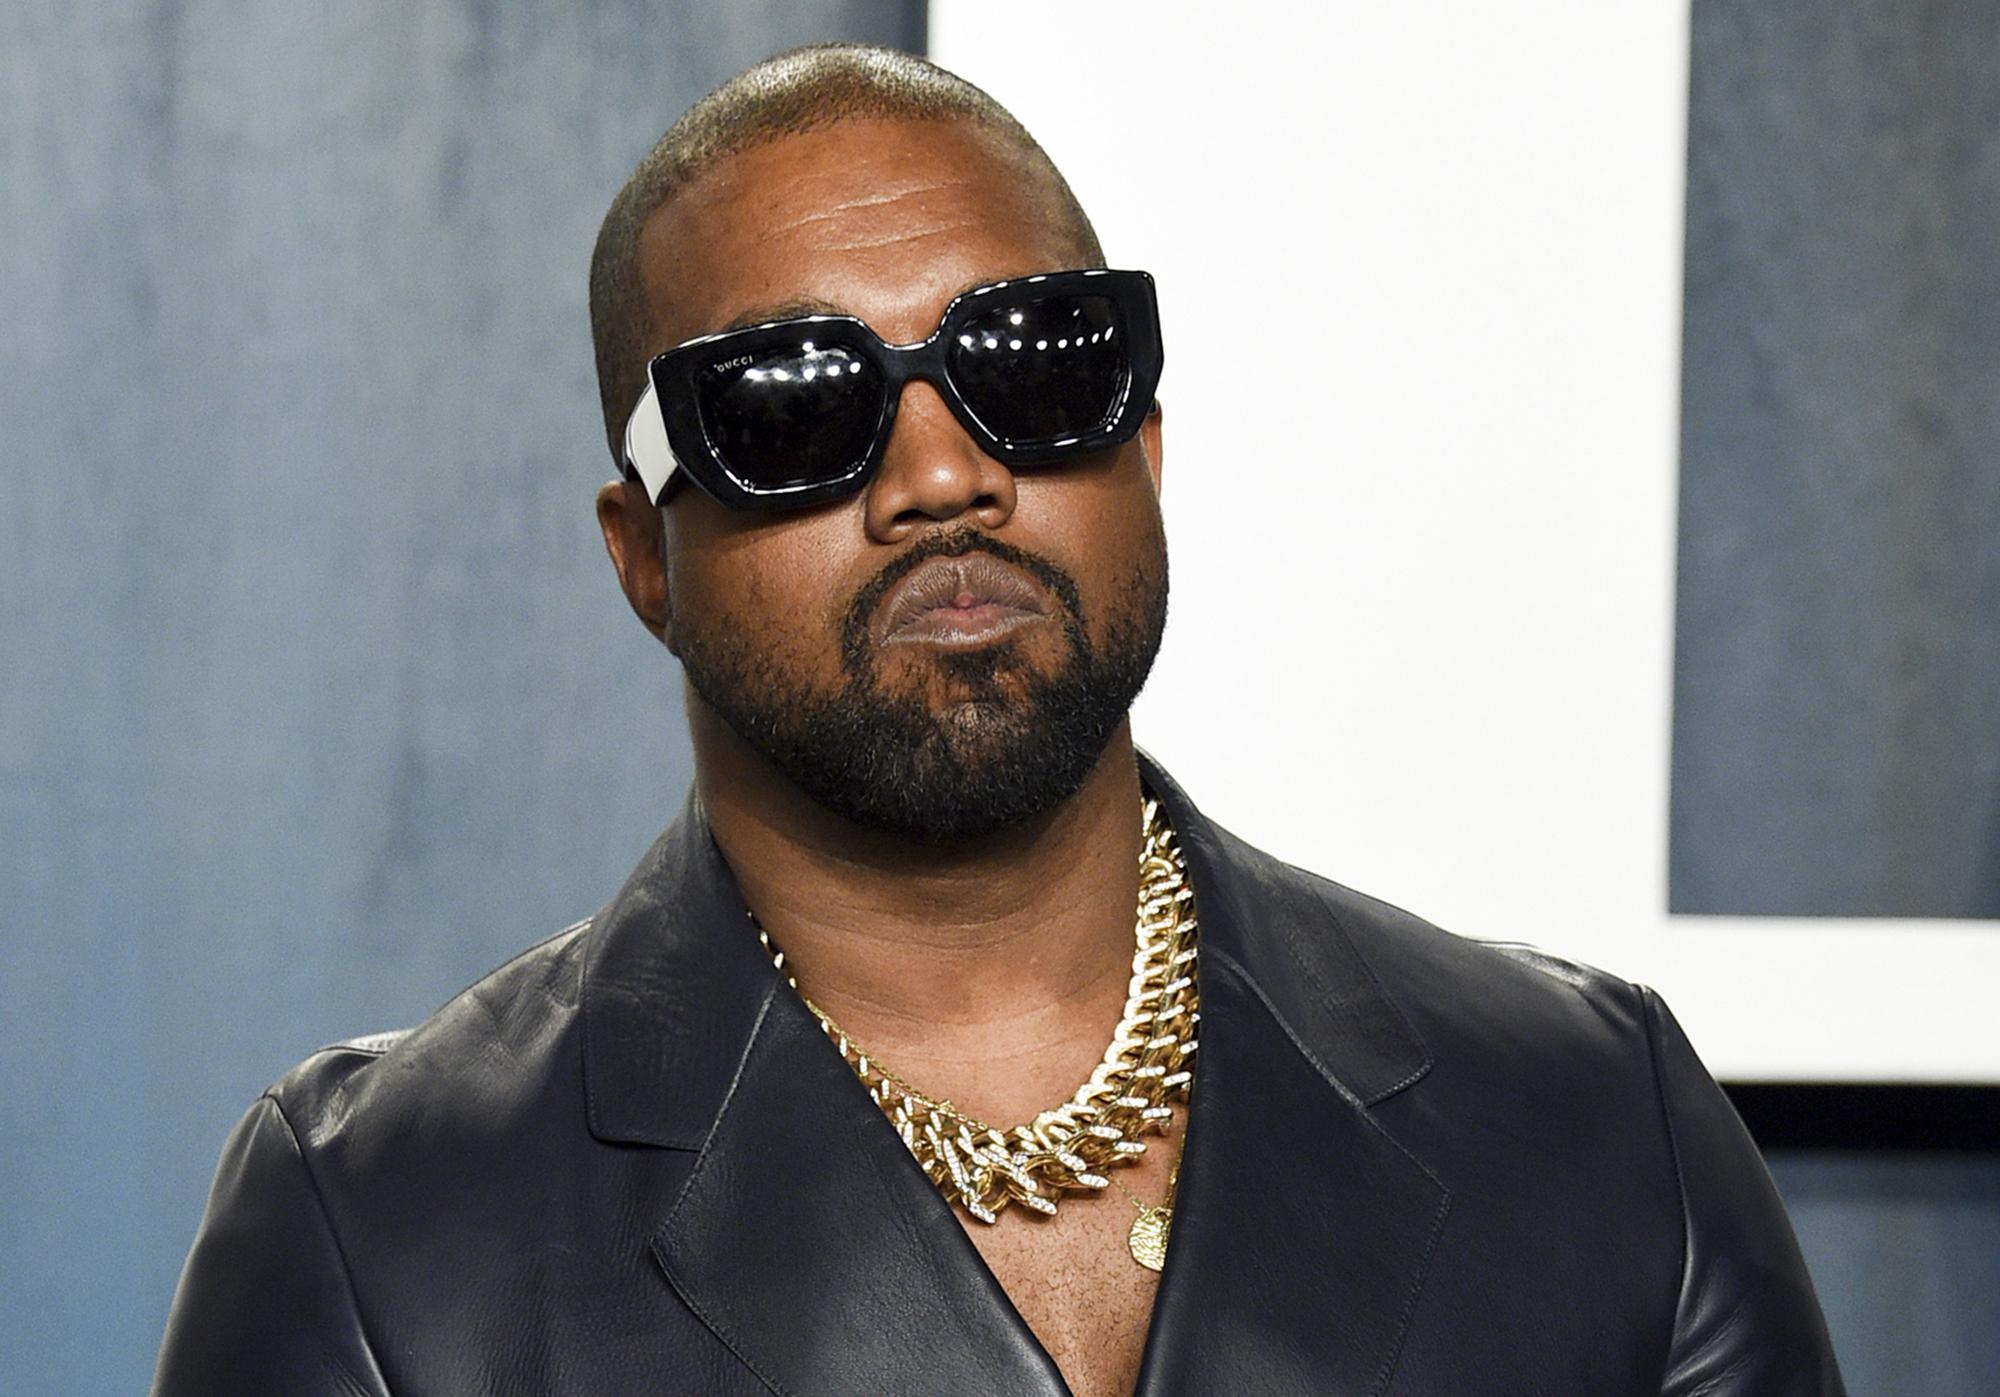 Kanye West Faces Lawsuit For Alleged Assault And Battery On Autograph Seeker